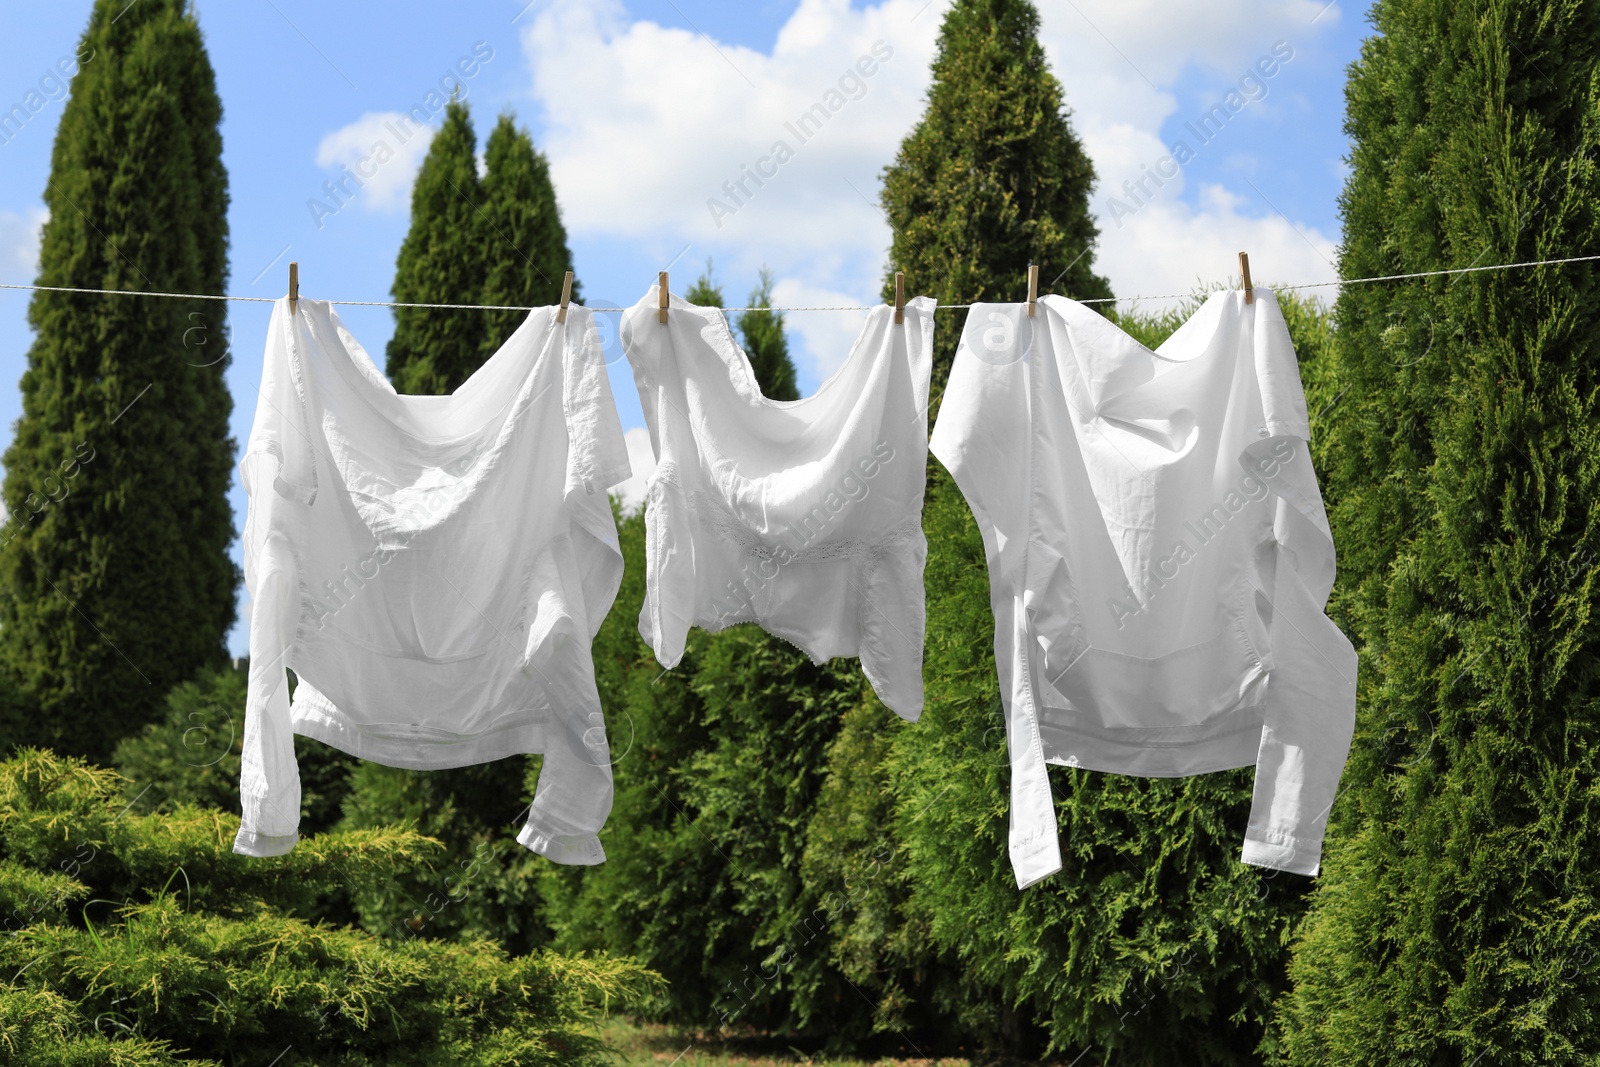 Photo of Clean clothes hanging on washing line in garden. Drying laundry